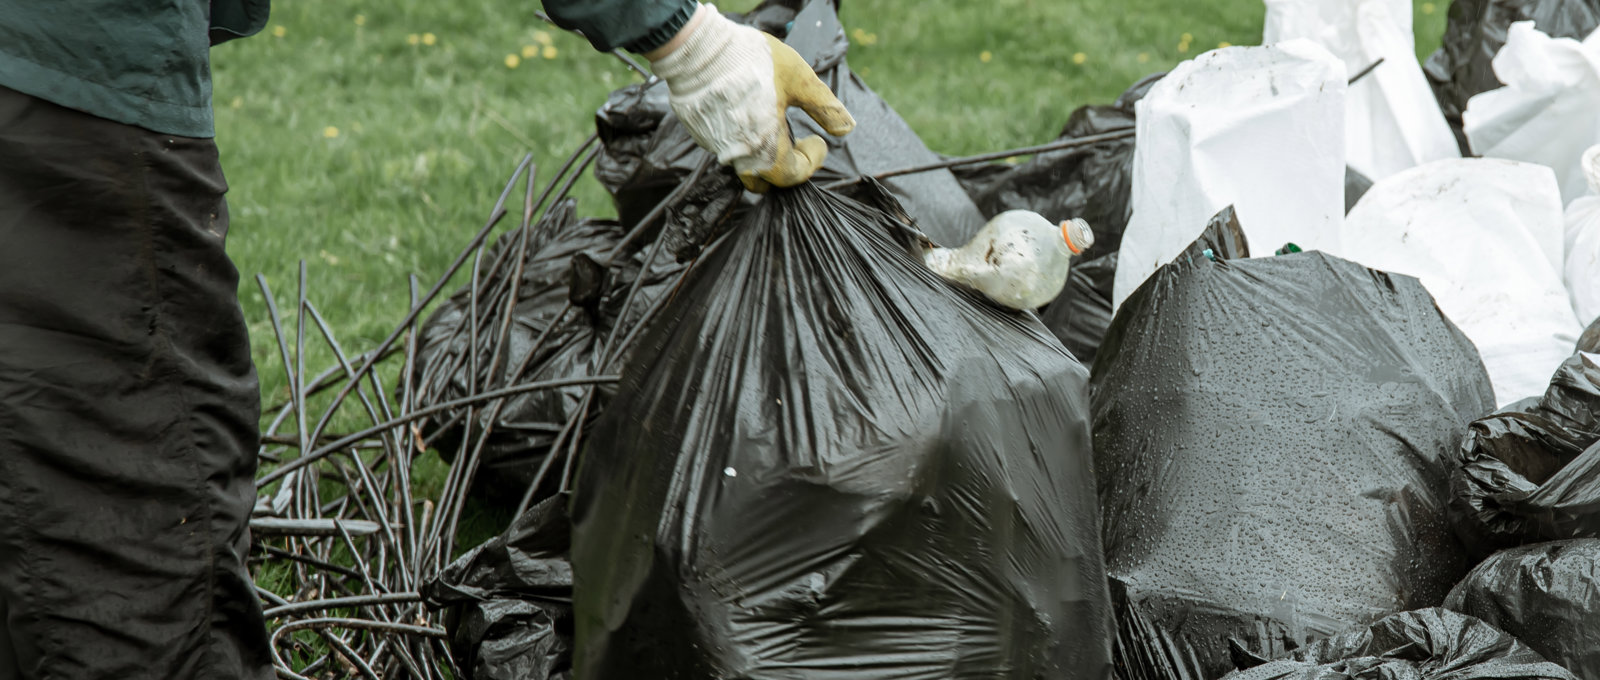 Close Up Trash Bags Filled With Trash After Cleaning Environment (1)